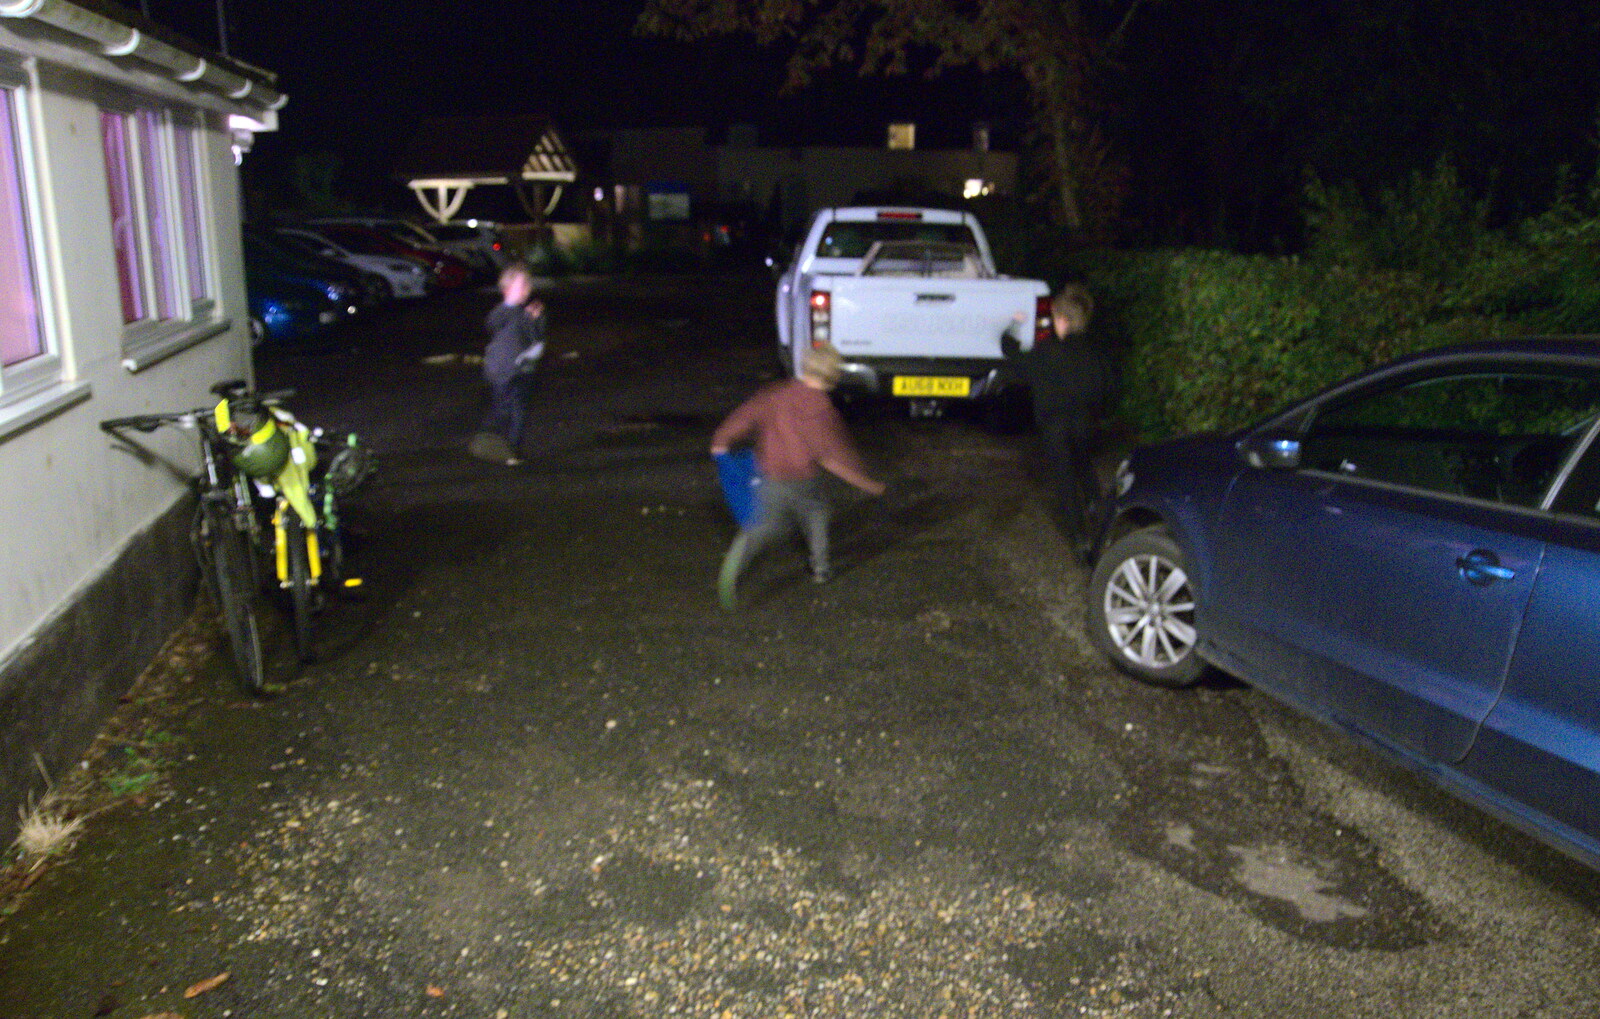 The boys mess around in the car park from Big Steve's Music Night, The Village Hall, Brome, Suffolk - 6th October 2018